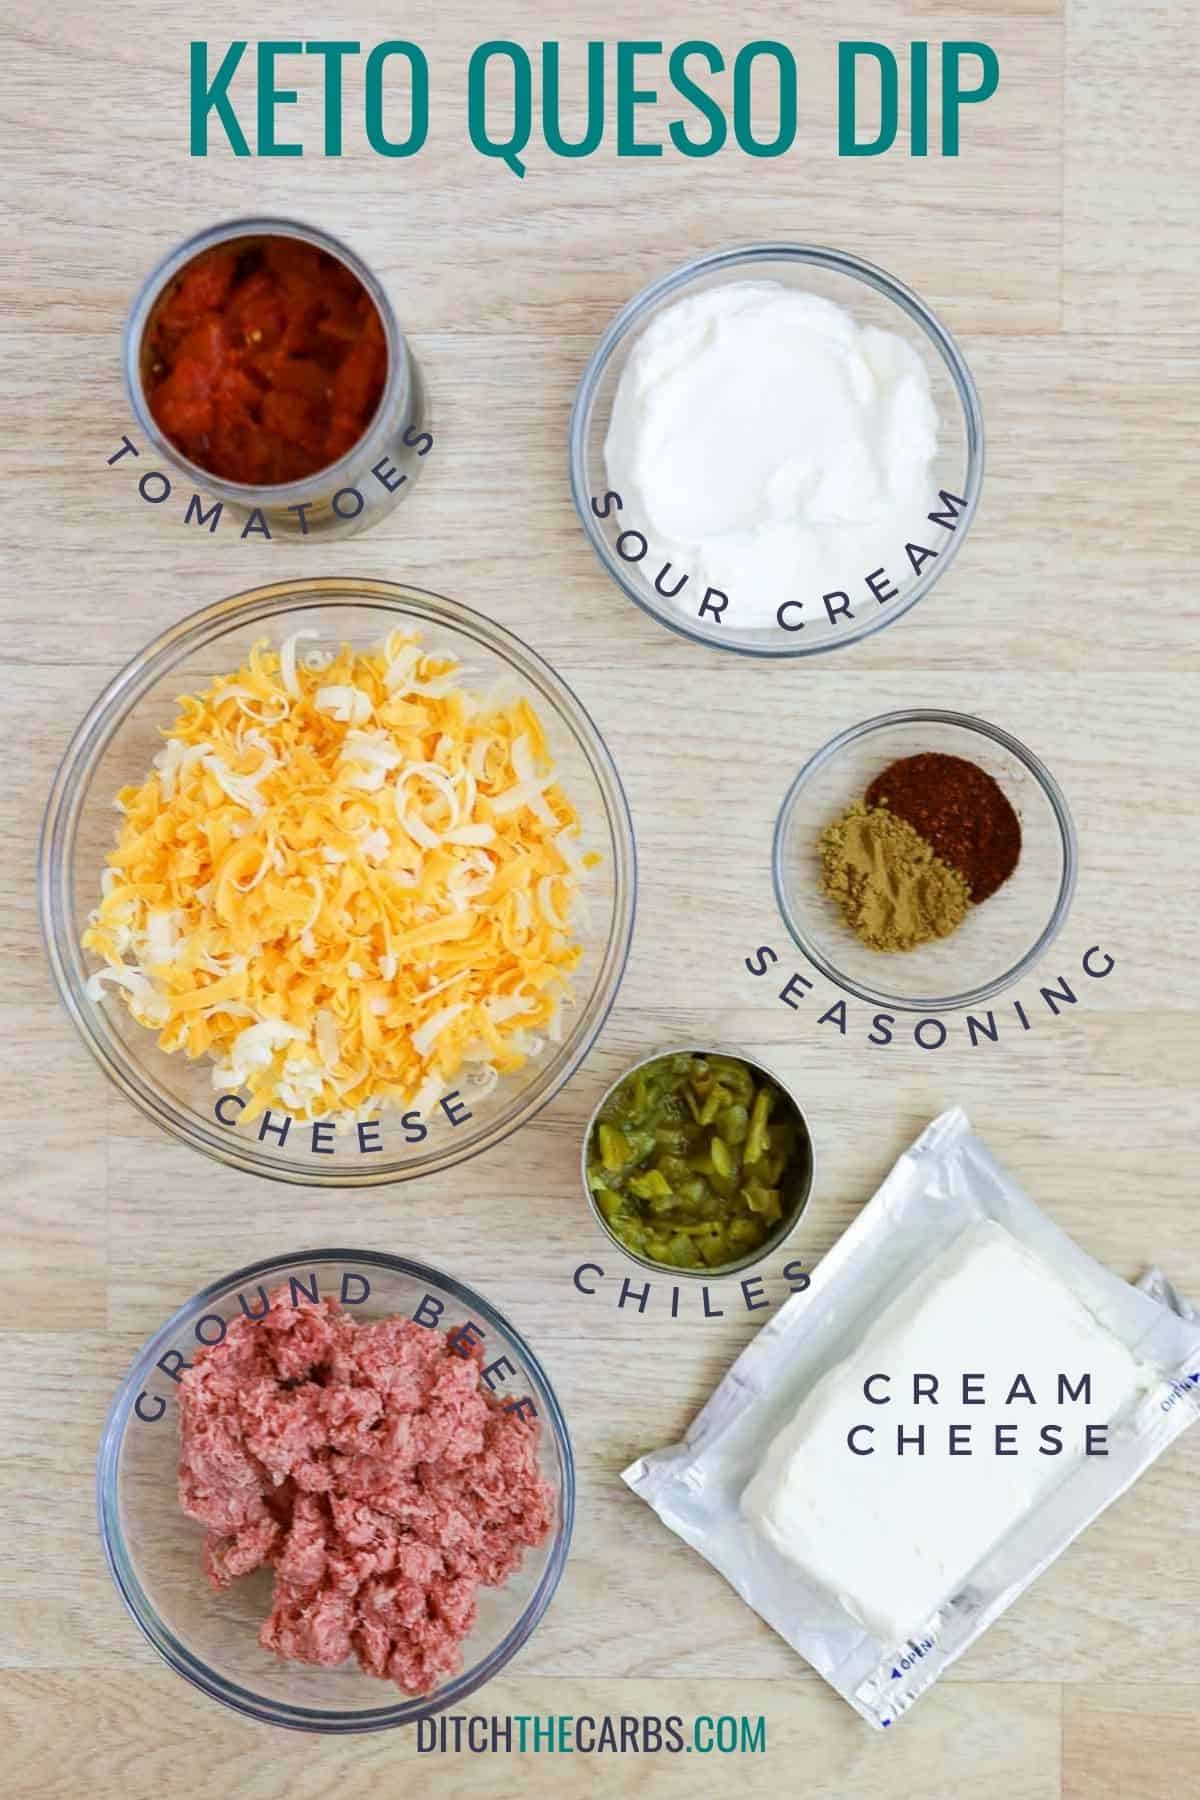 All the ingredients needed to make keto queso dip measured and ready to use on the counter.